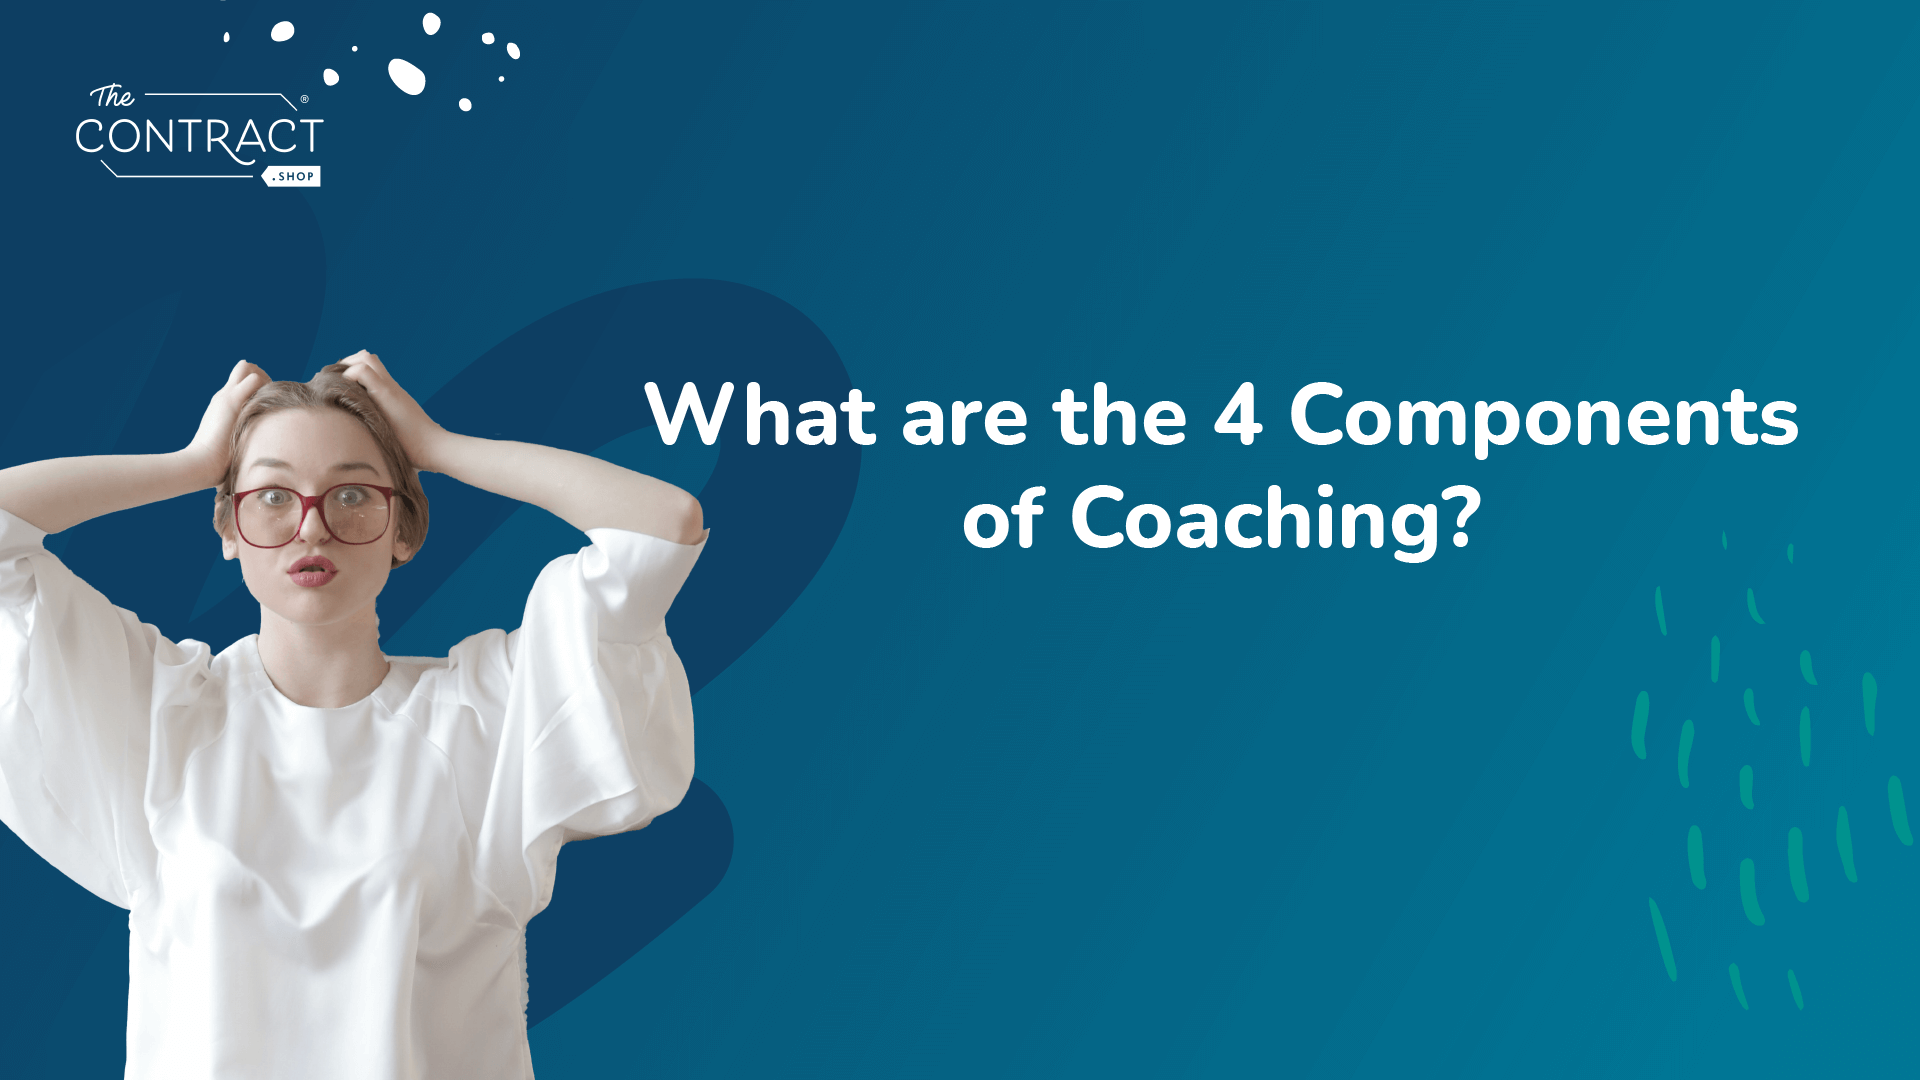 What are the 4 Components of Coaching?